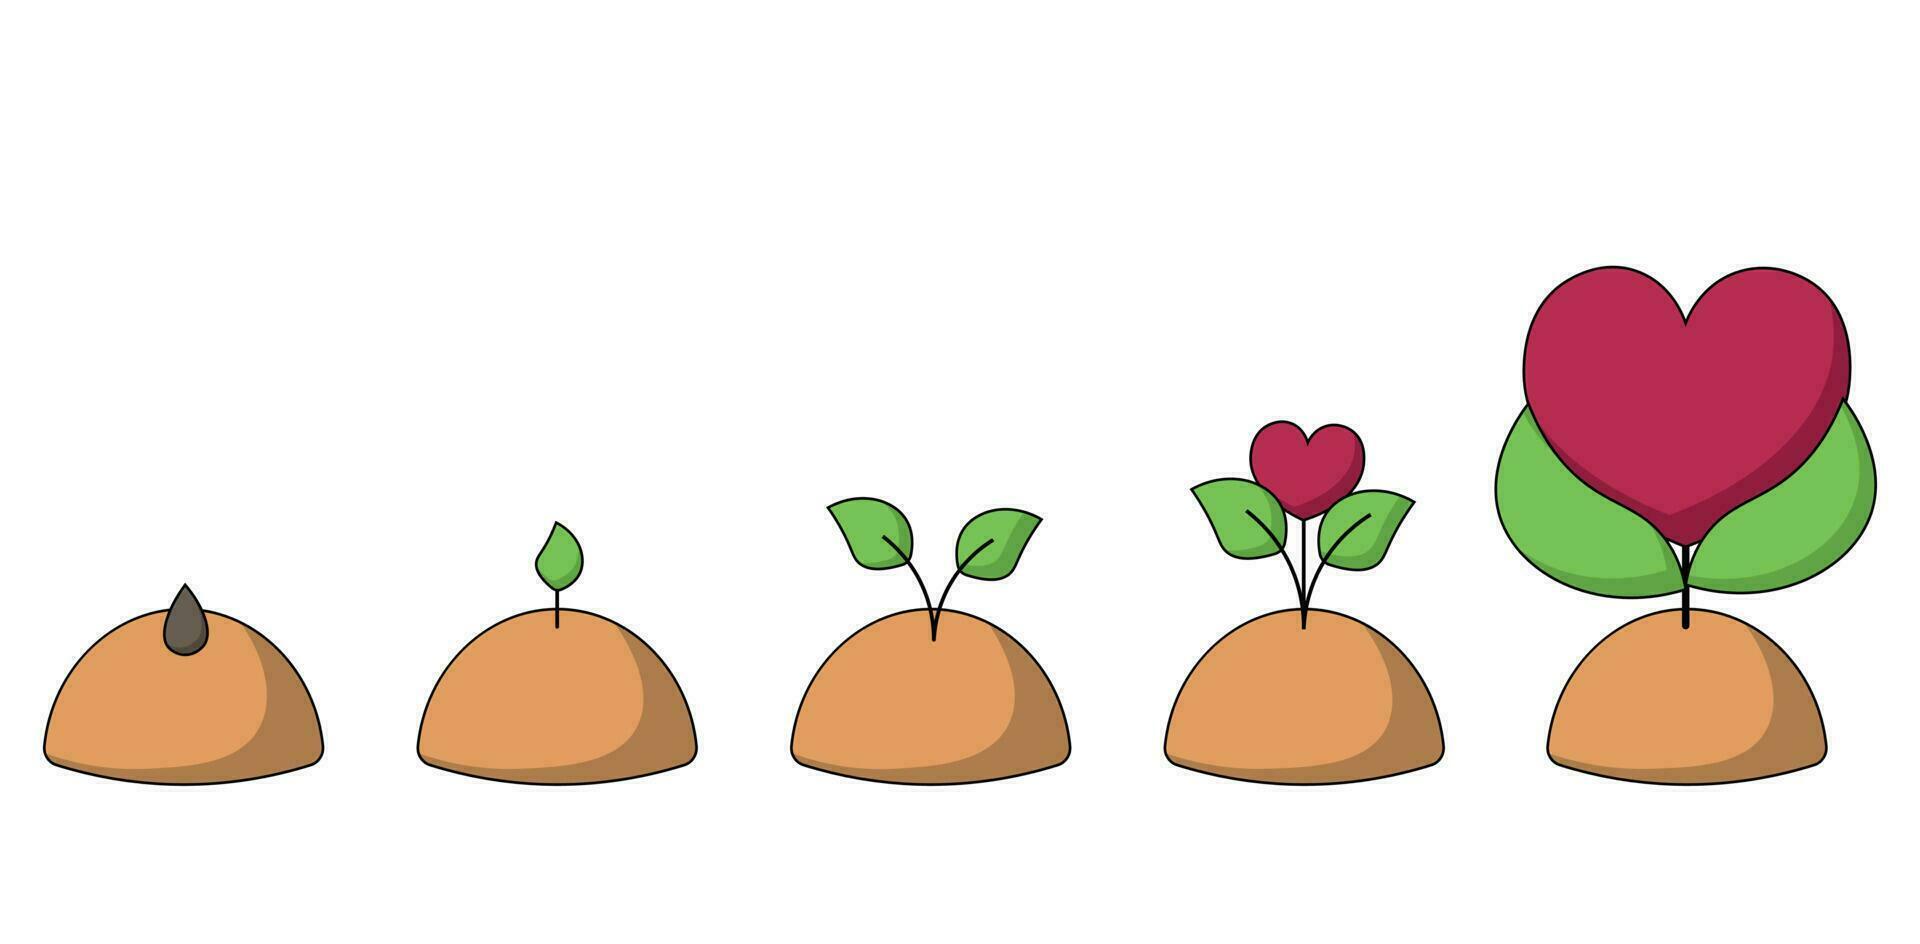 Stages of growth of a sprout from a seed to a heart-shaped flower in color vector